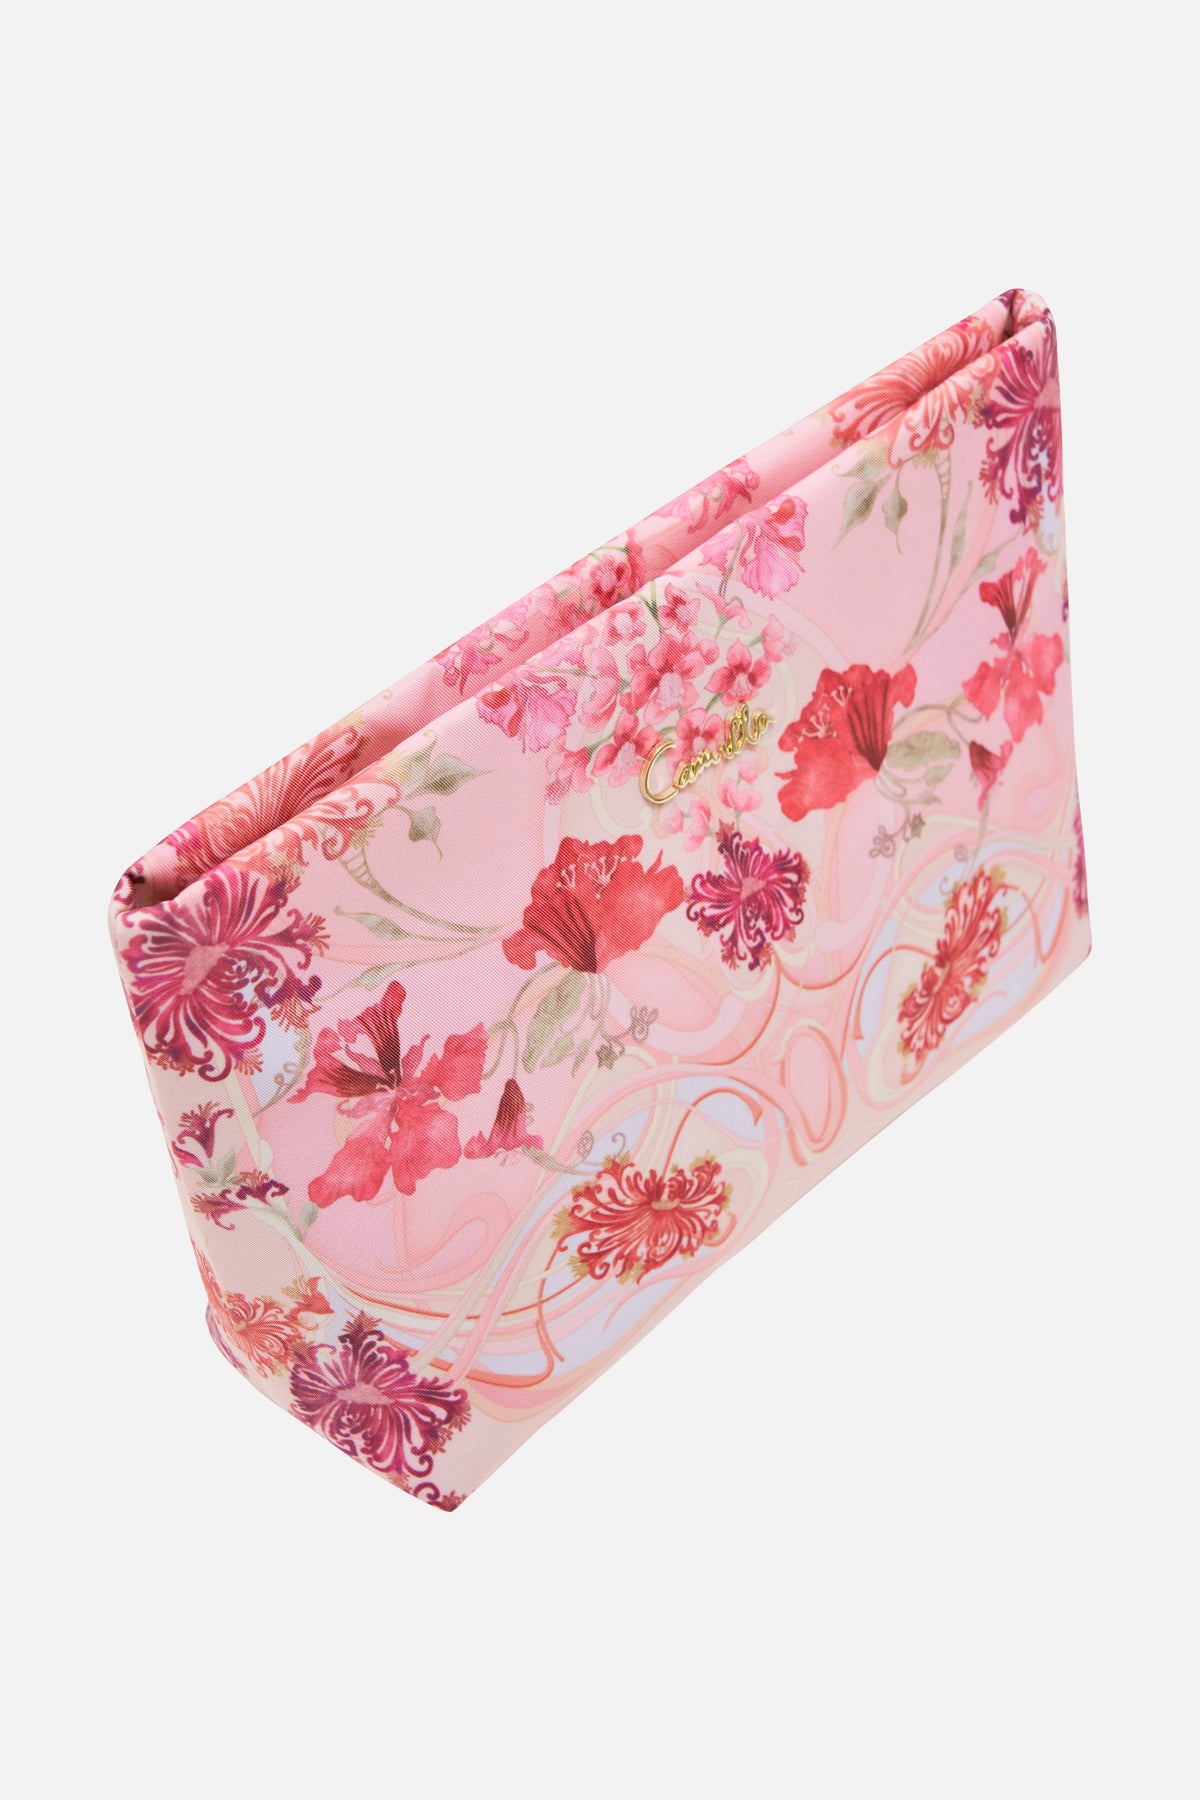 CAMILLA floral small makeup clutch in Blossoms and Brushstrokes